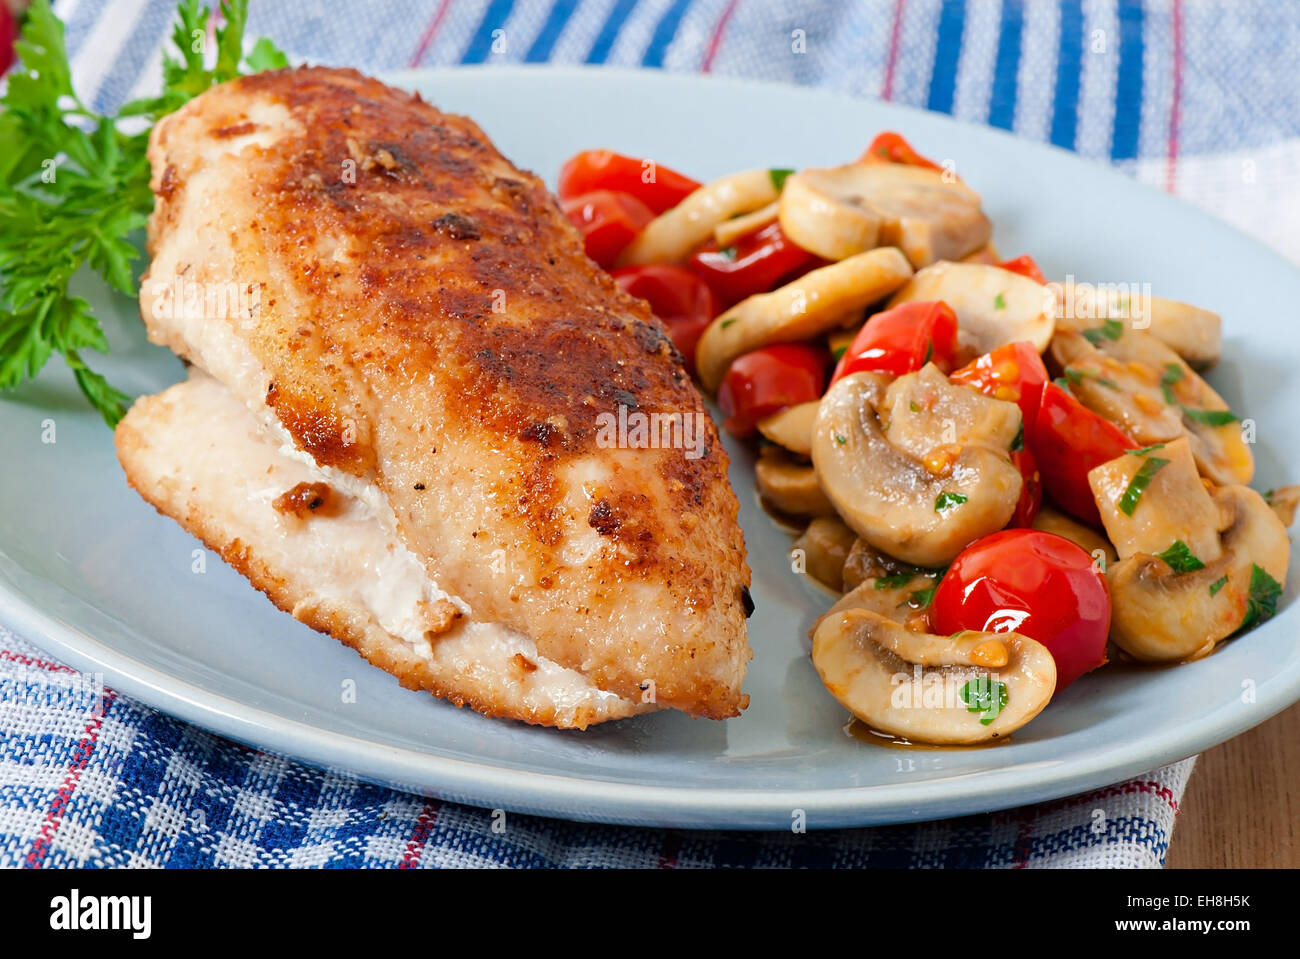 Chicken fillet in crispy breadcrumbs garnished with mushrooms and tomatoes Stock Photo